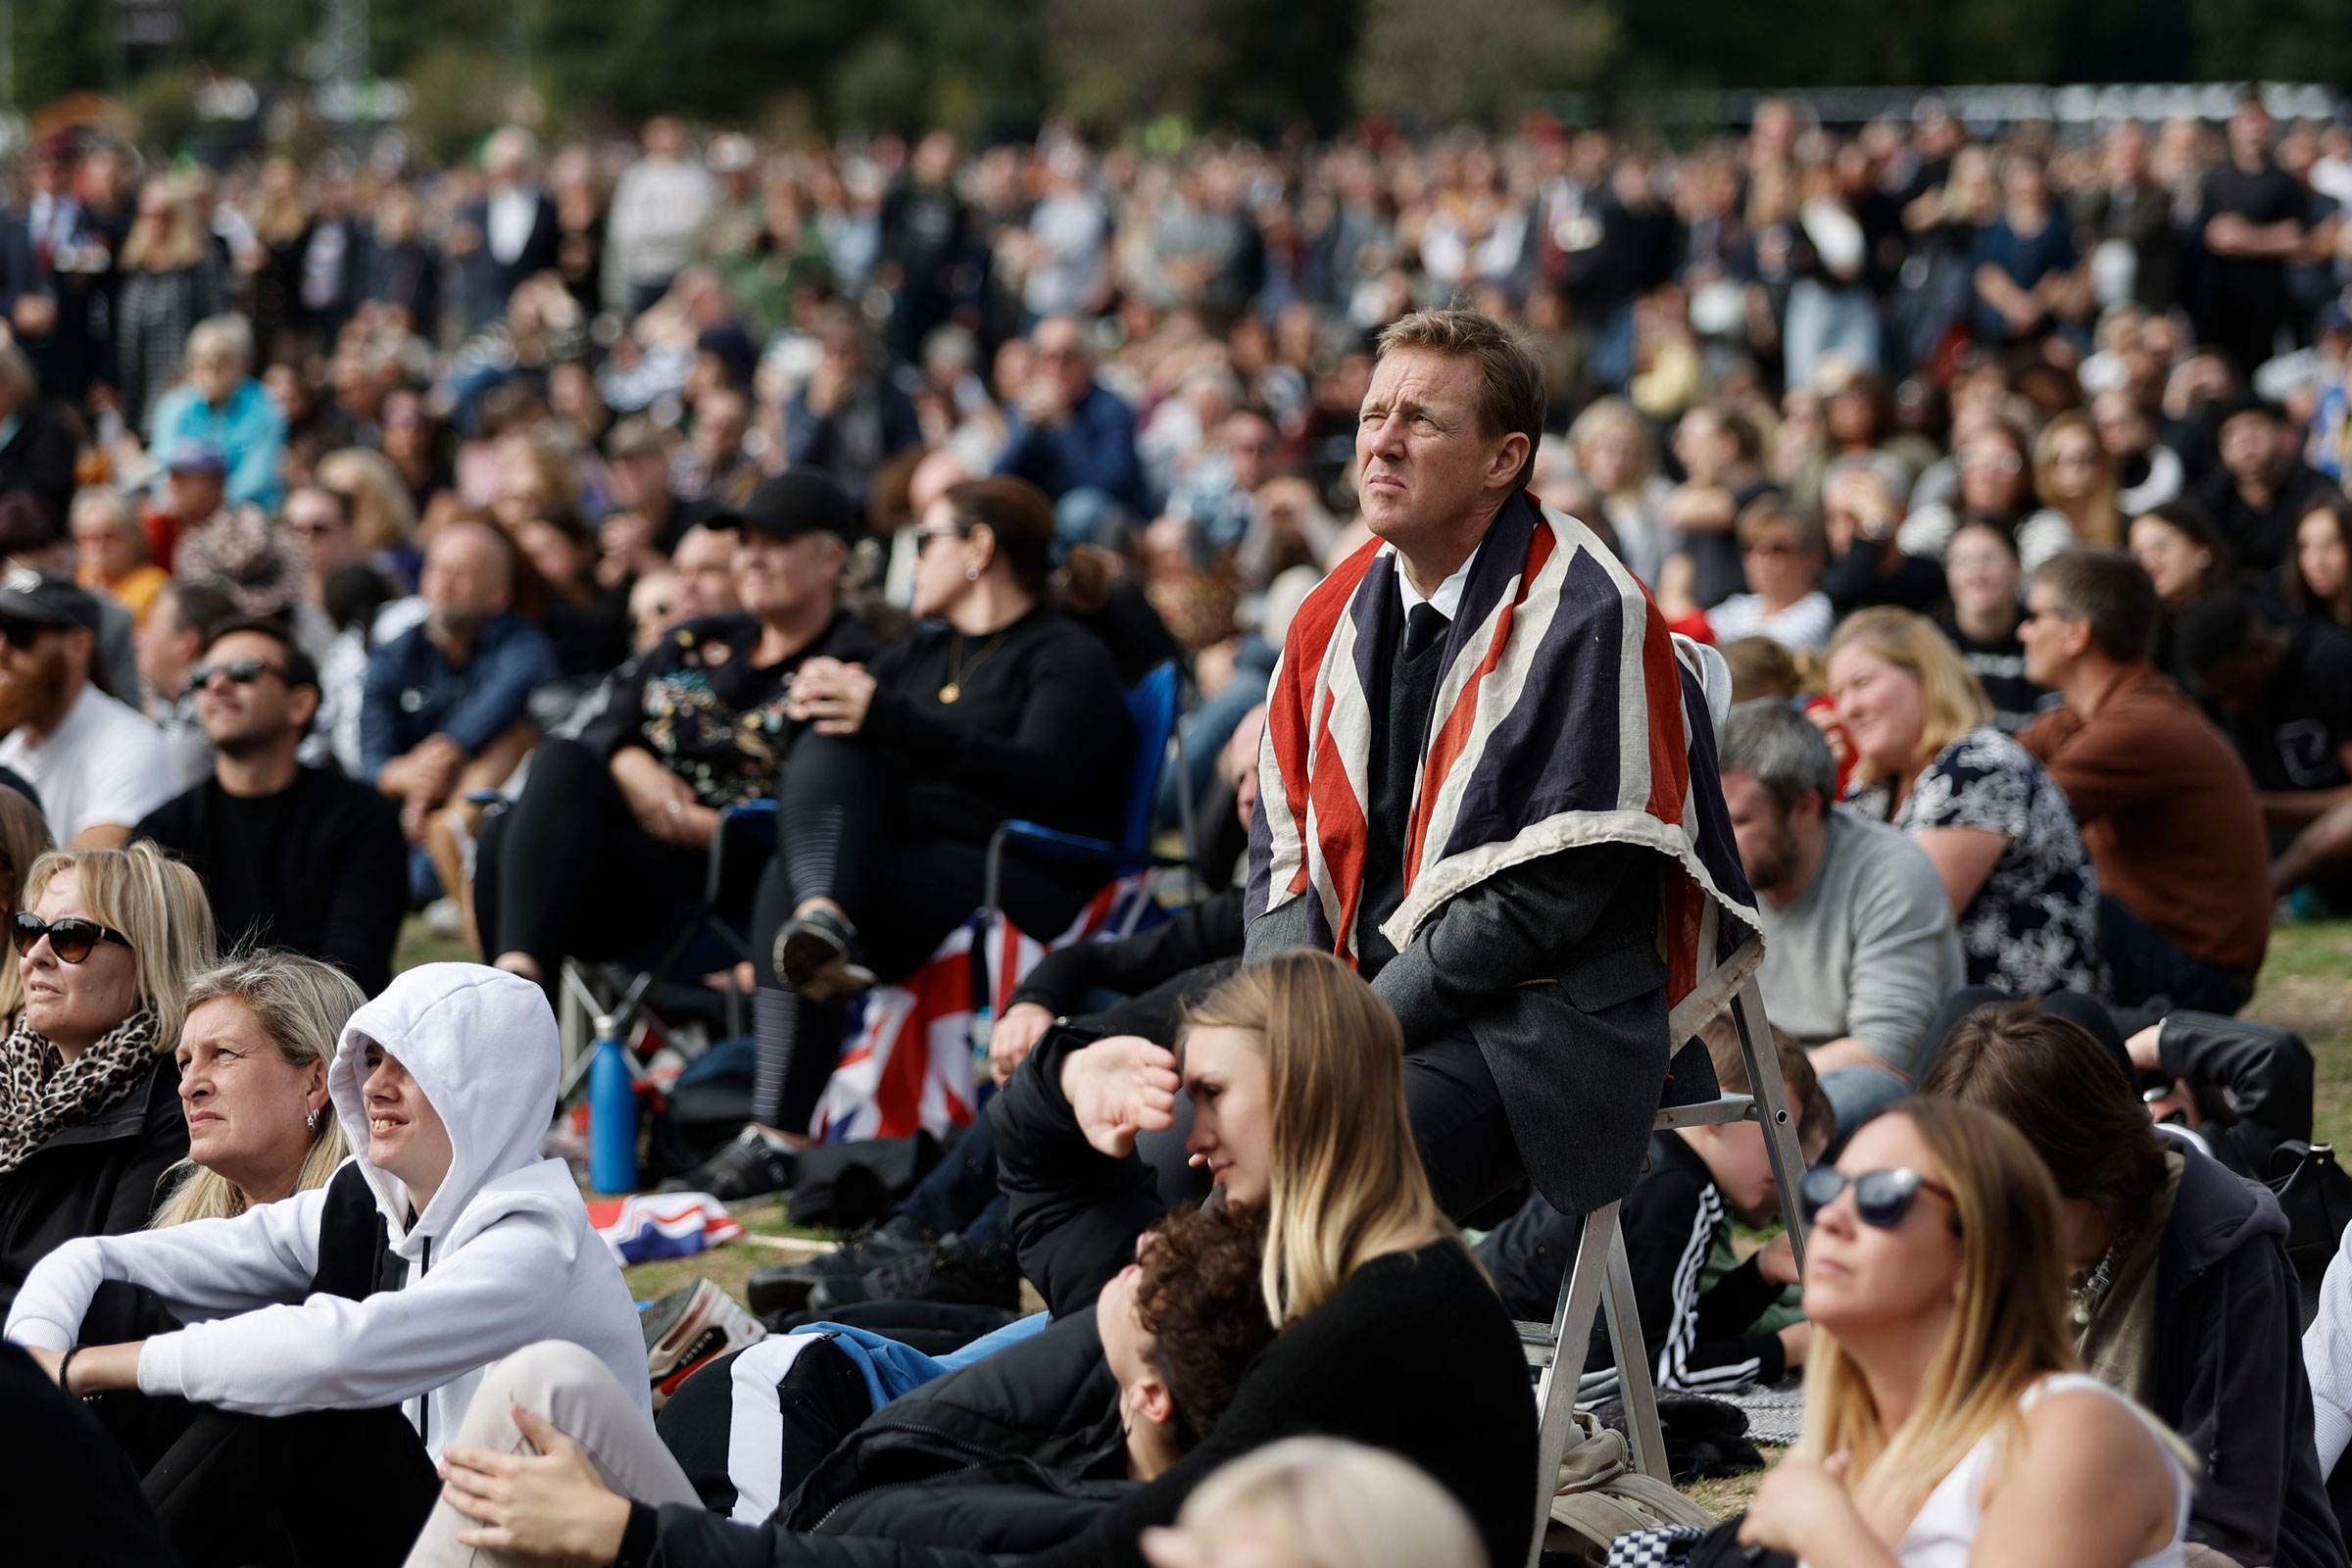 People in Hyde Park, in London, watch the State Funeral Service of Britain's Queen Elizabeth II on giant screens.